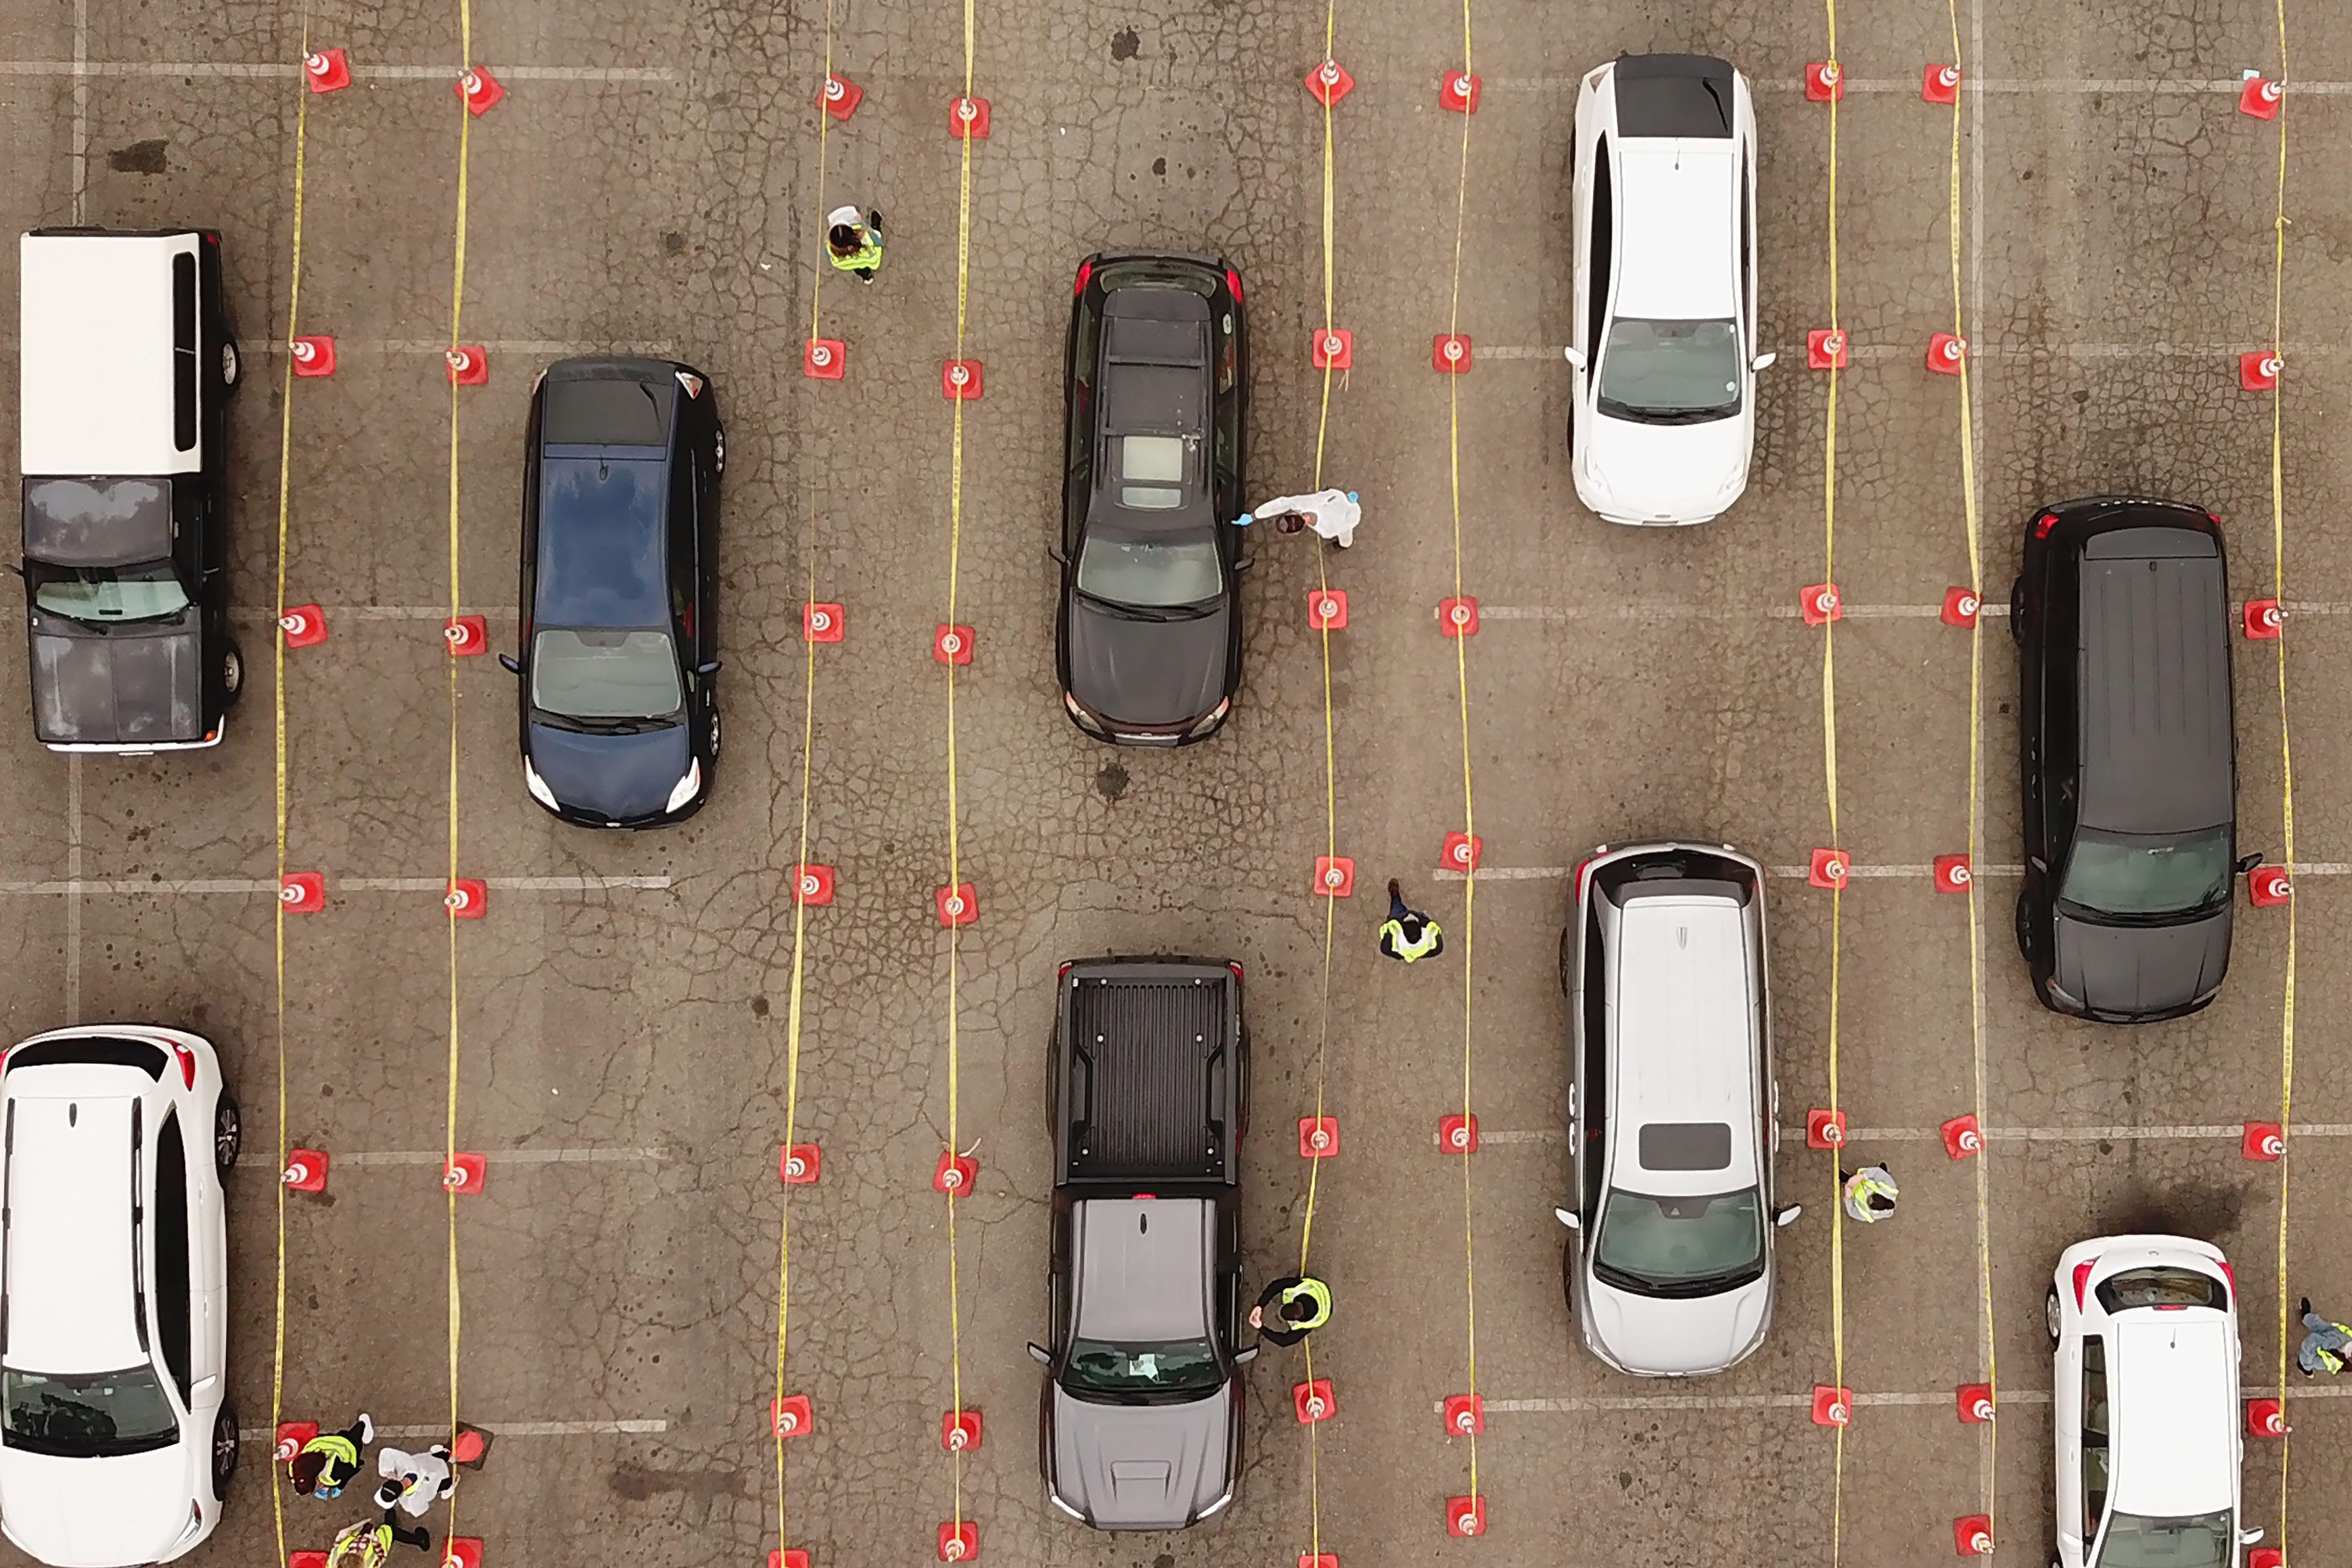 An aerial view of 9 cars waiting in line at a COVID-19 testing site.